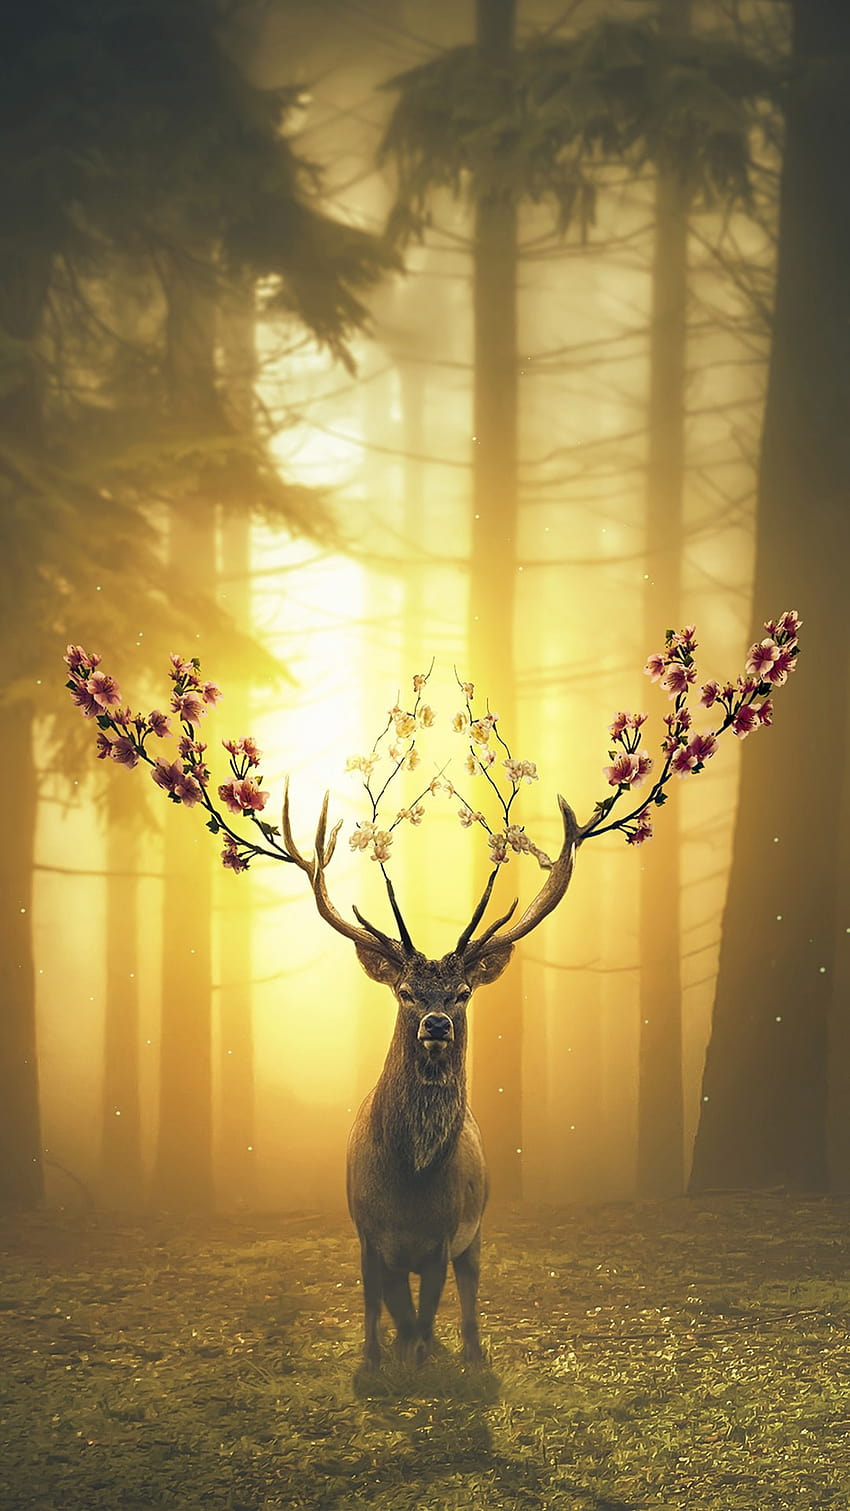 Download wallpaper 800x1420 deer silhouette horns night iphone  se5s5c5 for parallax hd background